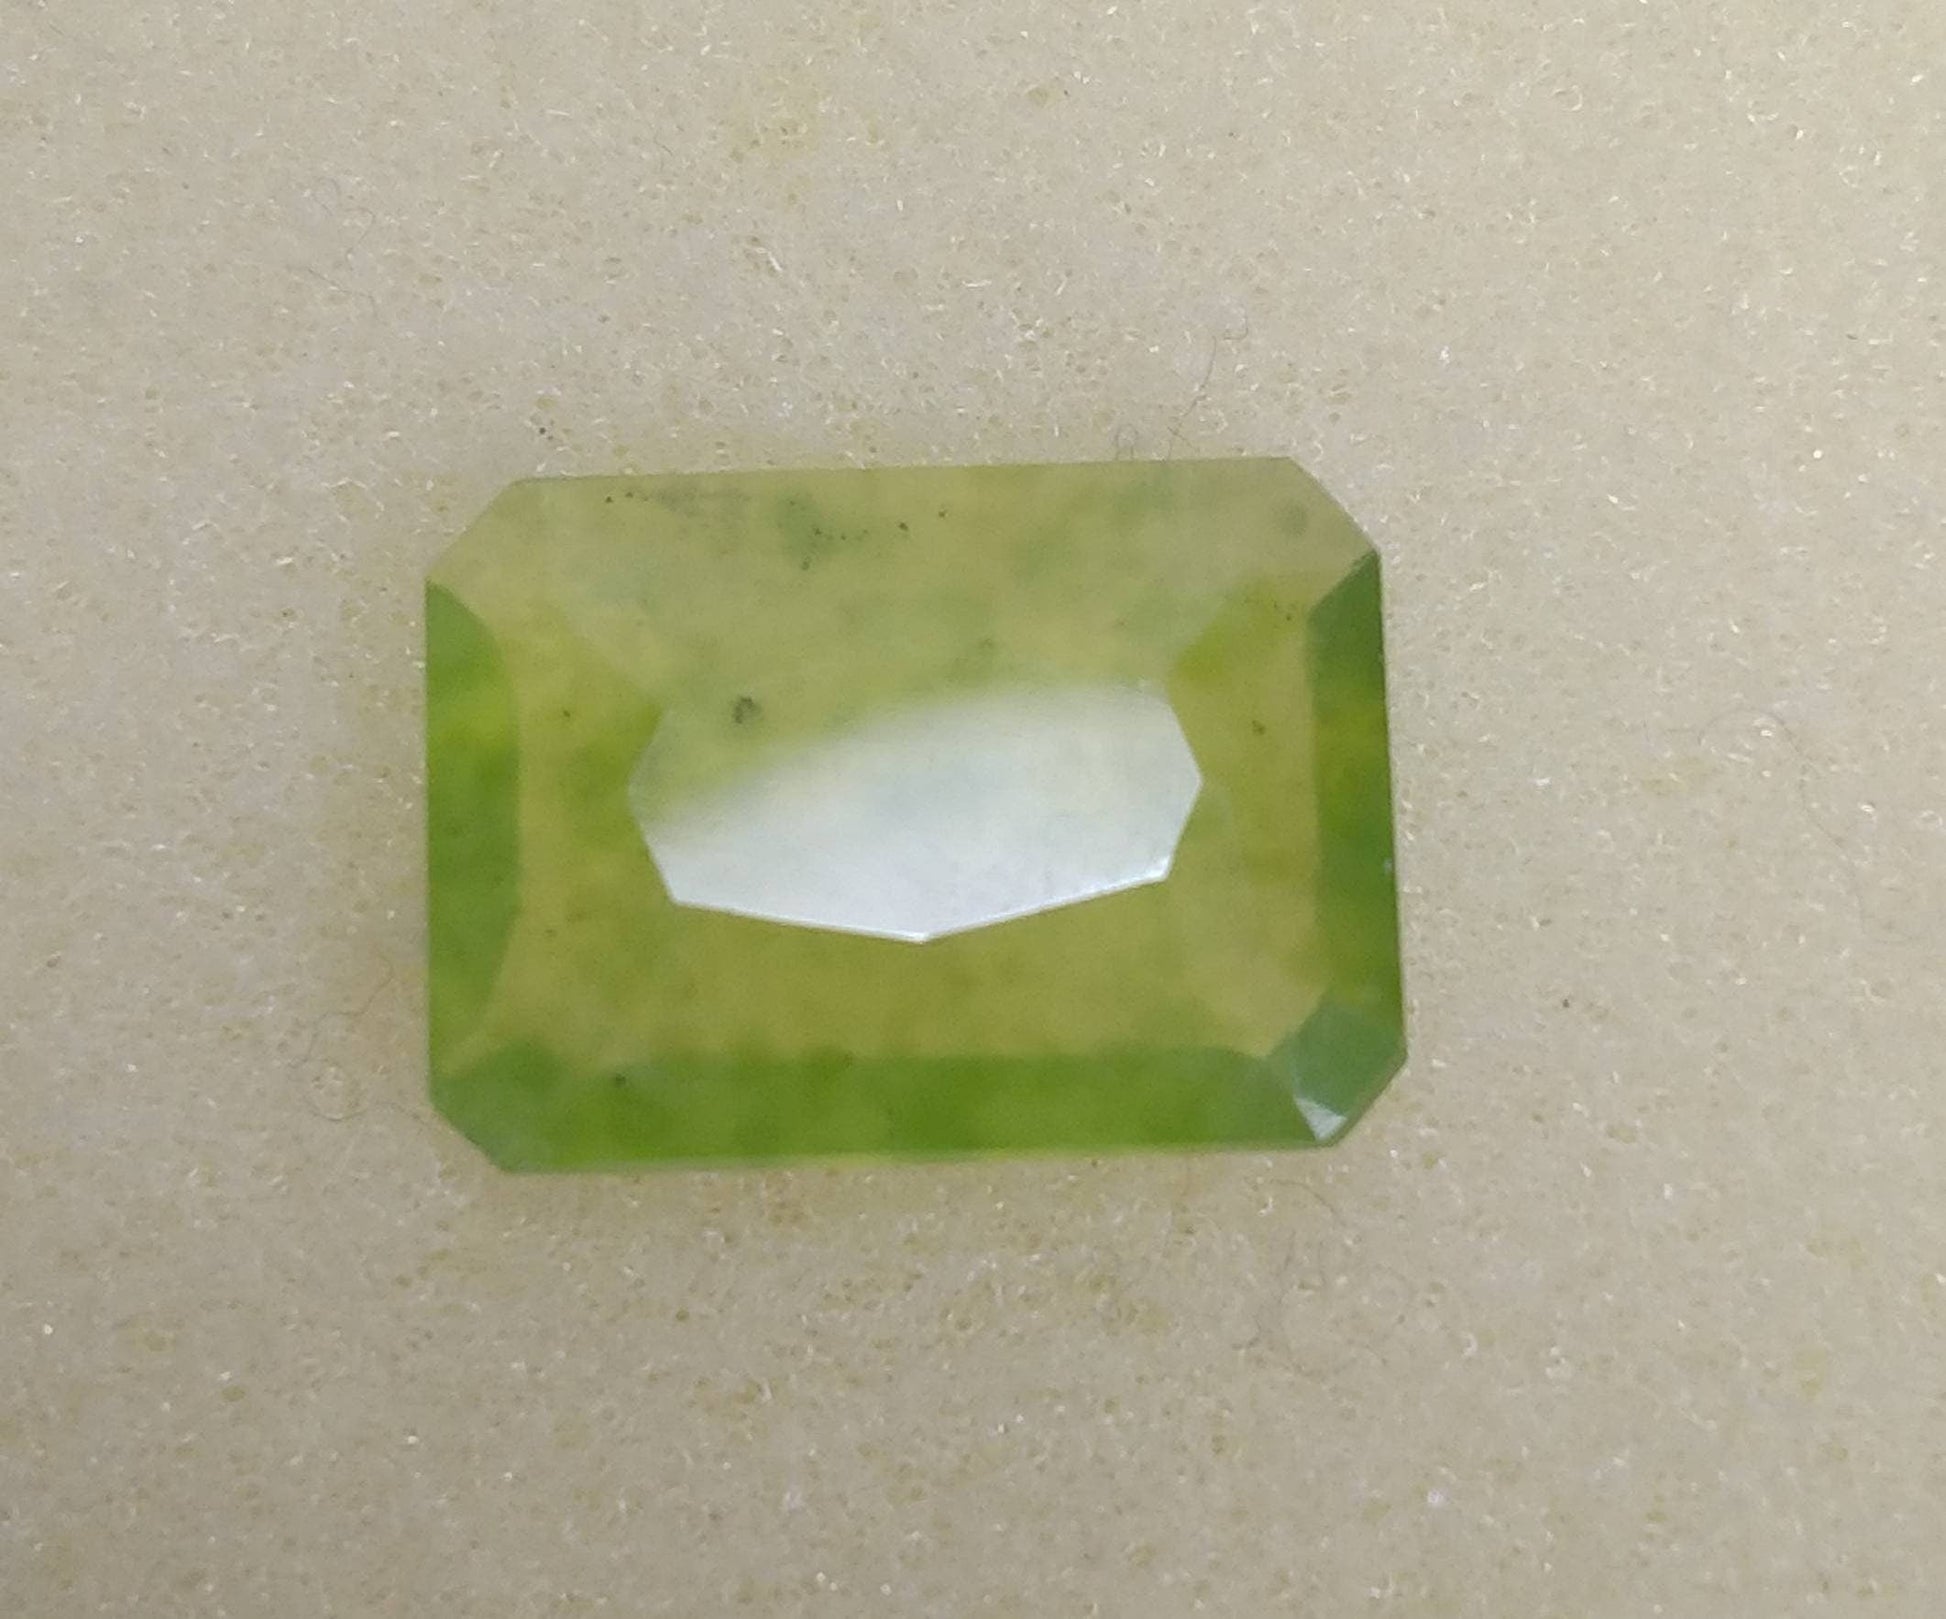 ARSAA GEMS AND MINERALSNatural top quality beautiful 6.5 carat radiant shape Faceted green hydrograssular garnet gem - Premium  from ARSAA GEMS AND MINERALS - Just $12.00! Shop now at ARSAA GEMS AND MINERALS